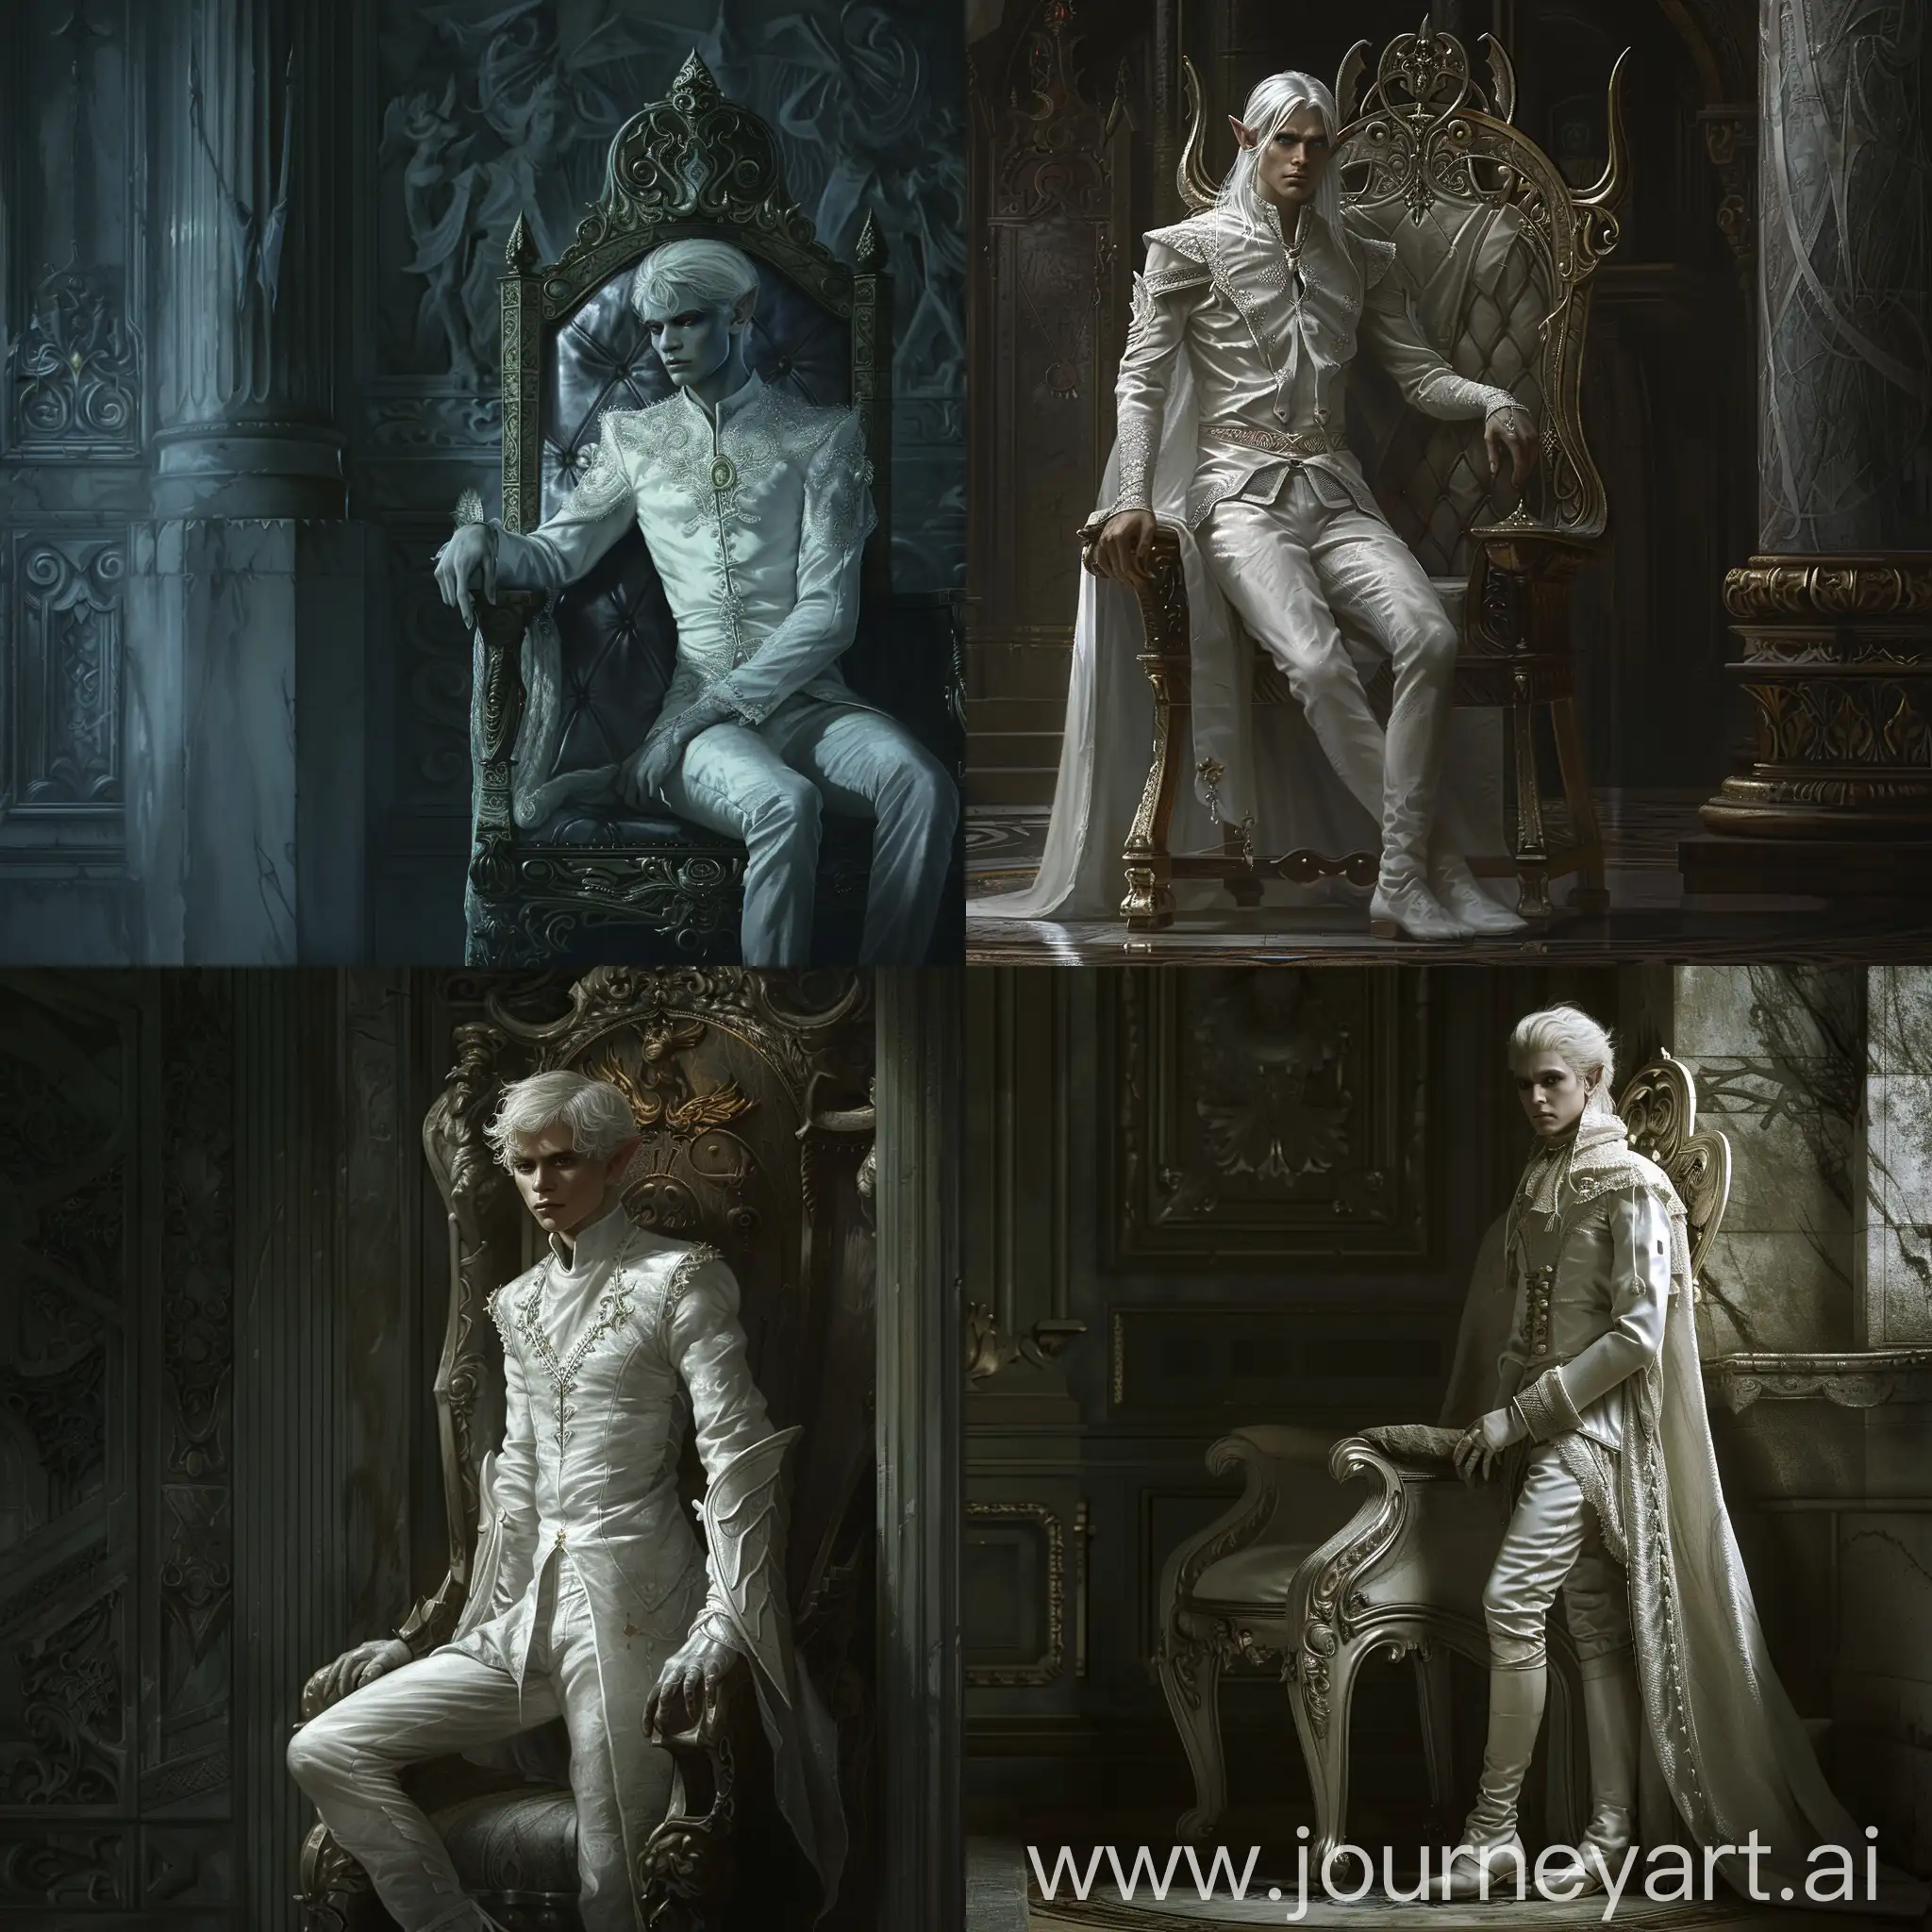 Dark room, the chamber of an Elven King. He is evil, standing next to his throne. He is young but with a firm expression. Wearing white royal clothes and has white hair and light gray skin